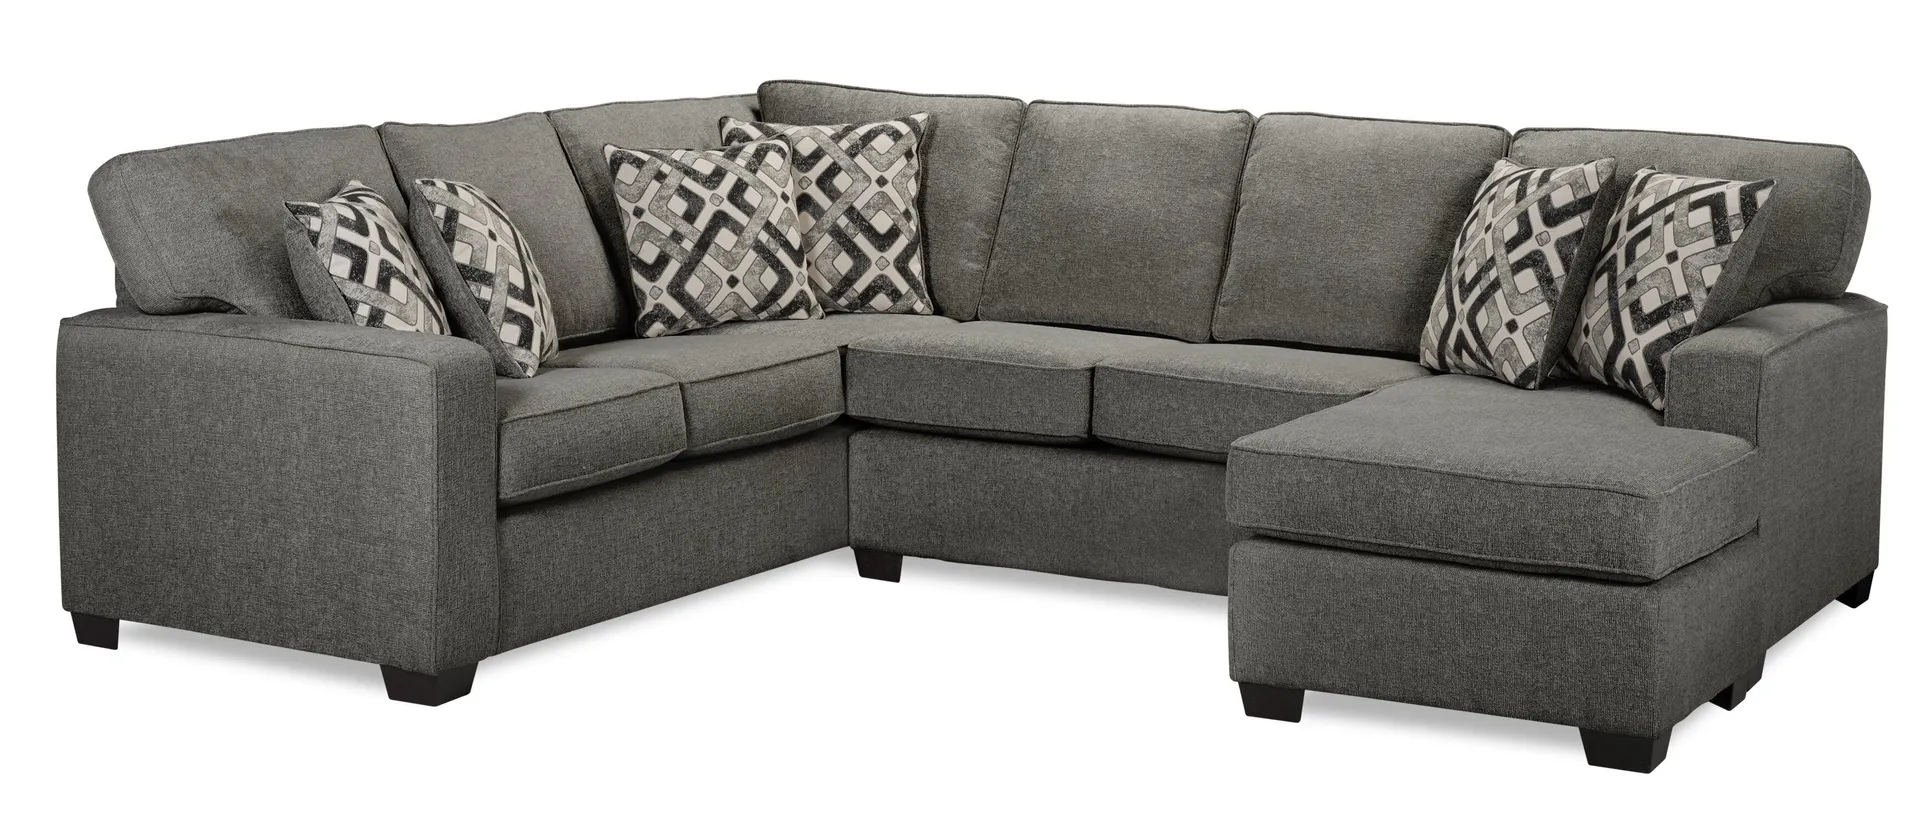 Verona 2-Piece Brushed Linen-Look Fabric Right-Facing Sectional - Charcoal